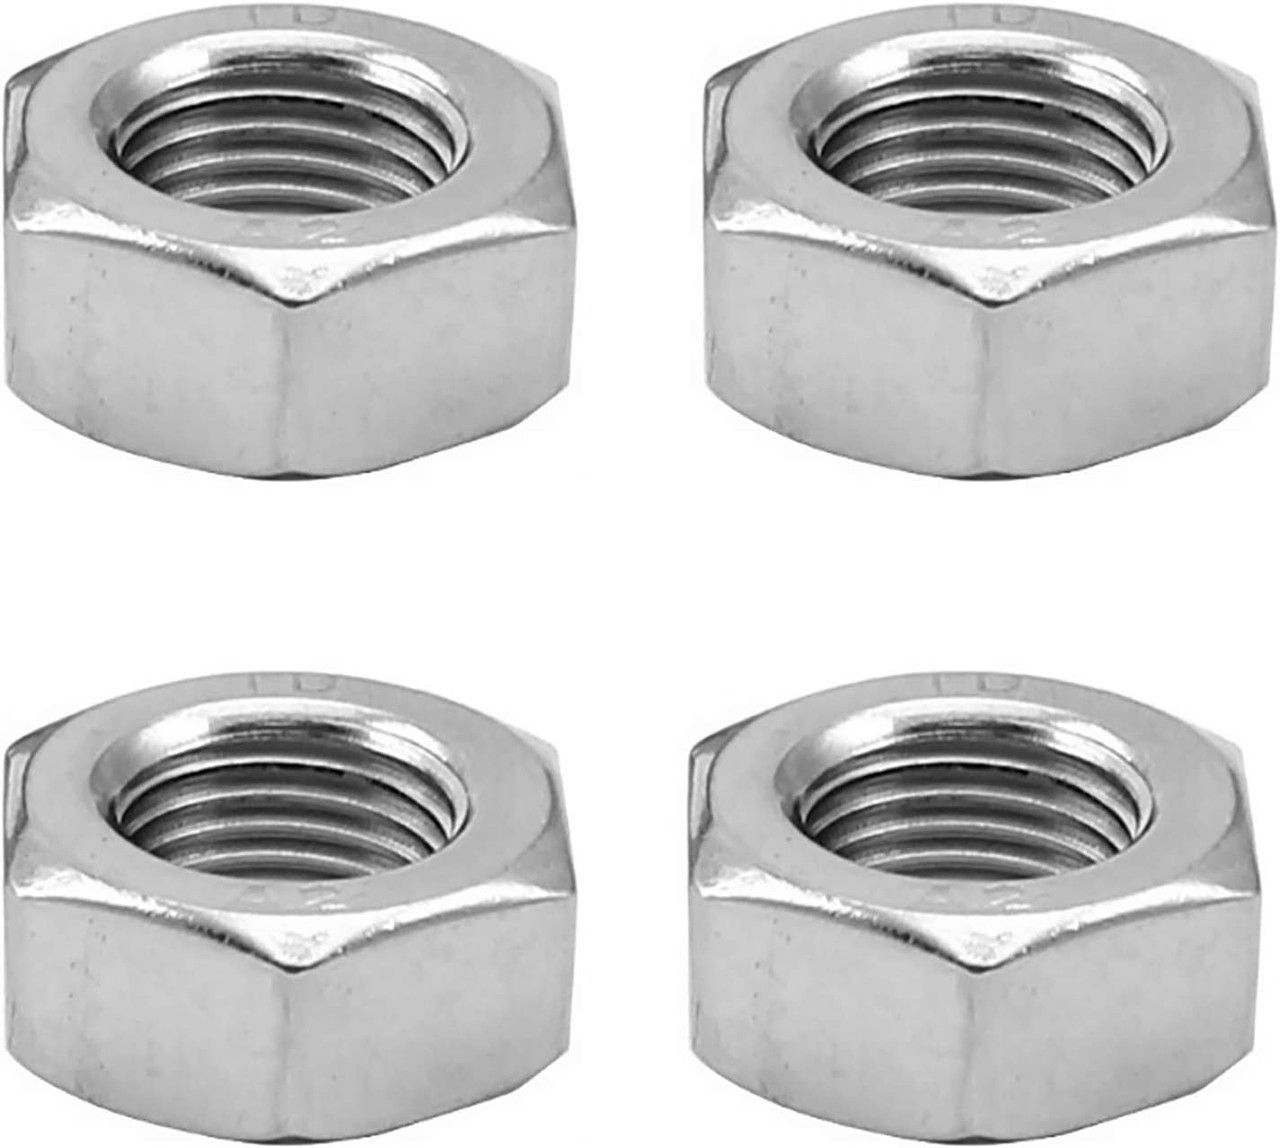 M6 Full Nut (20 Pack) 6mm A2 Stainless Steel Hex Hexagon Nuts Free UK Delivery